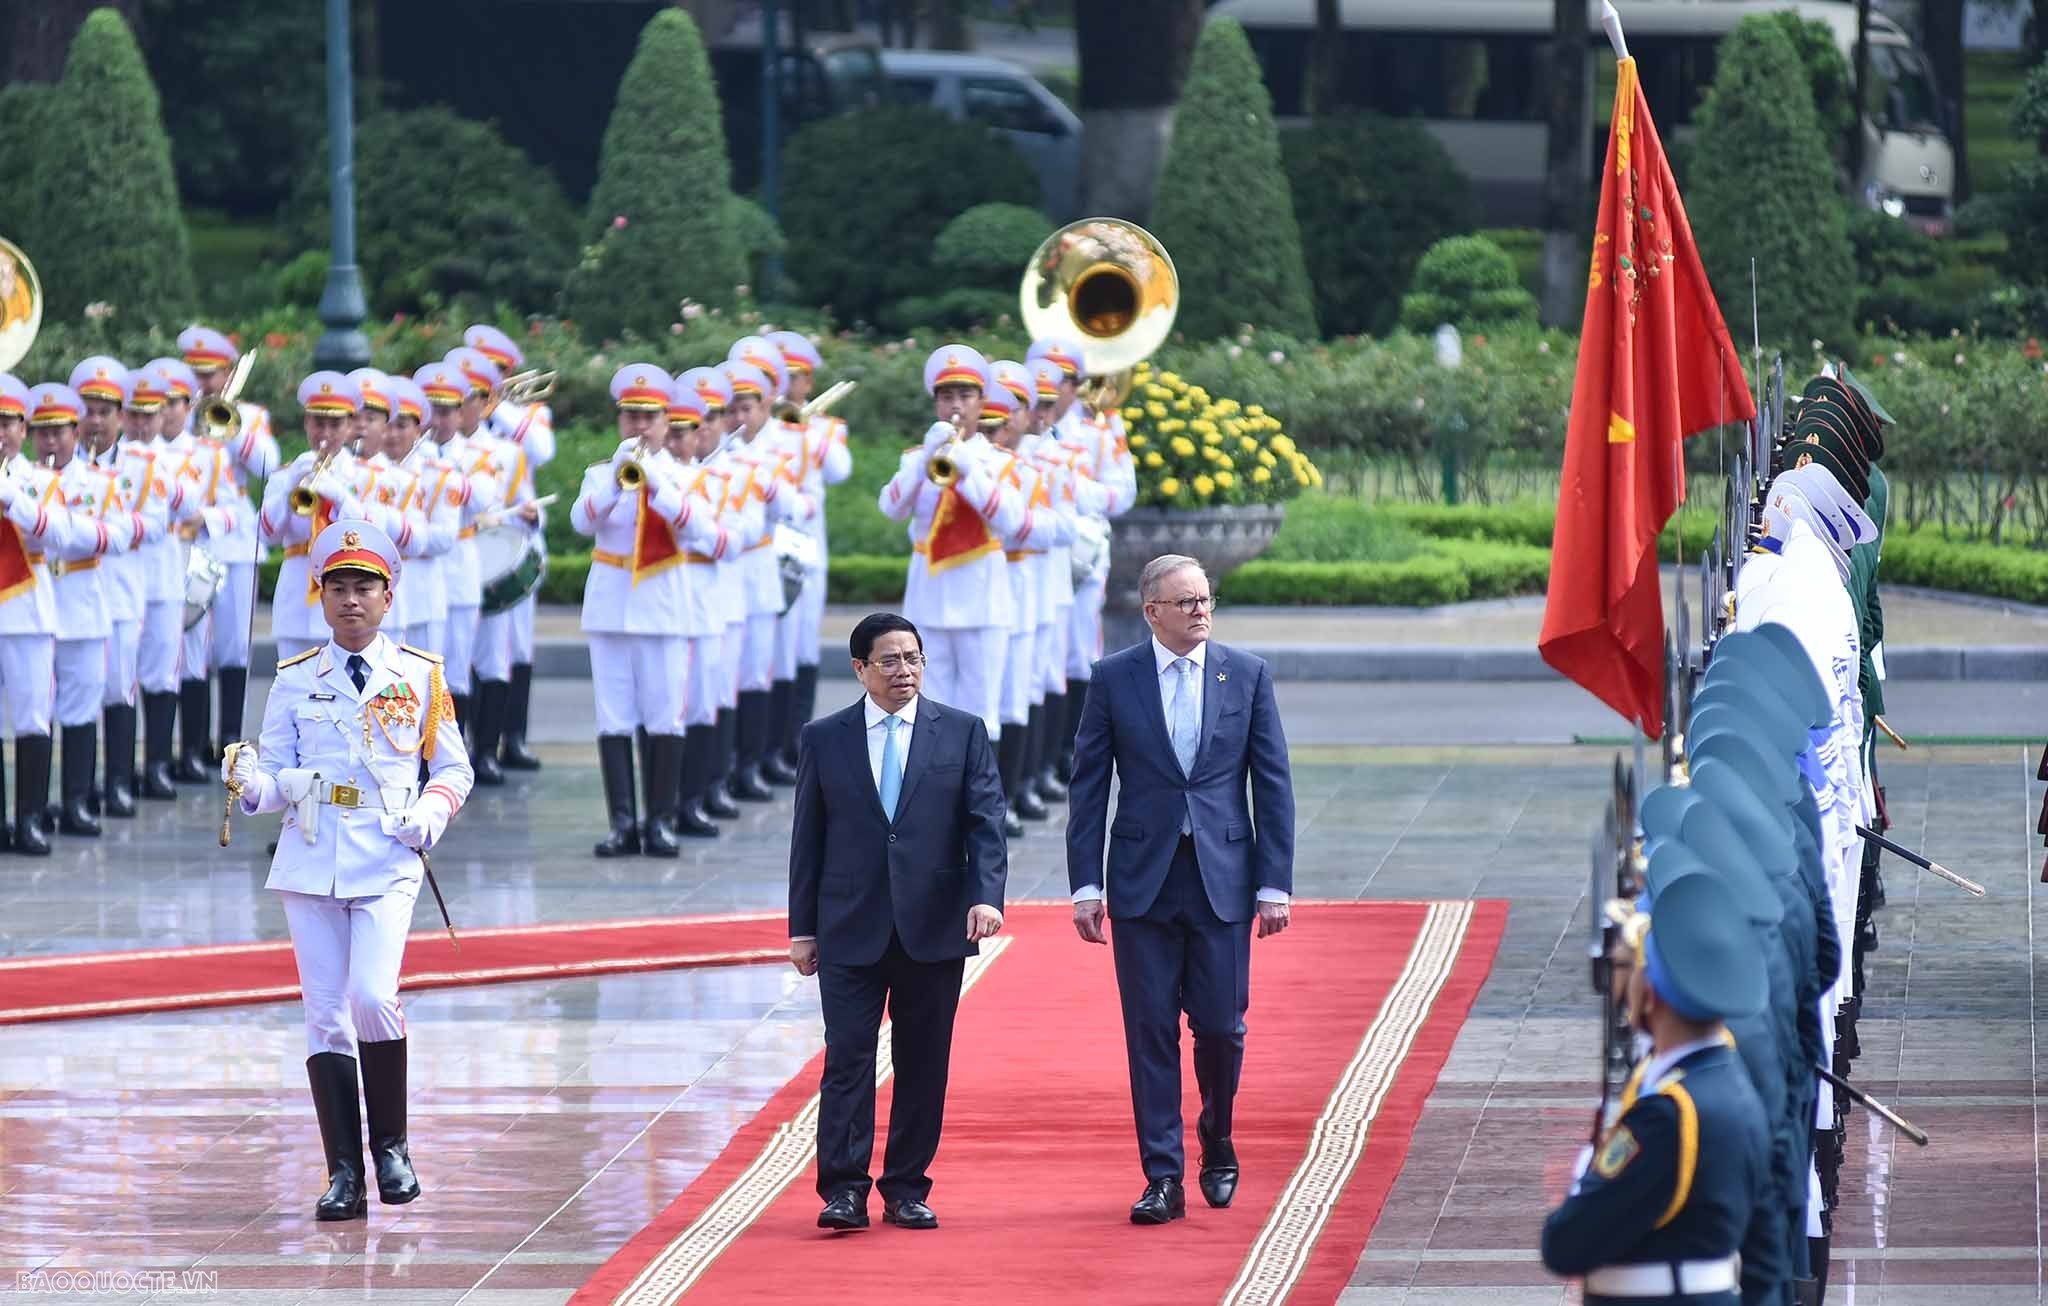 Review on external affairs from May 29-June 4: Australian PM’s visit to Vietnam; improving efficiency of consular work, citizen protection abroad